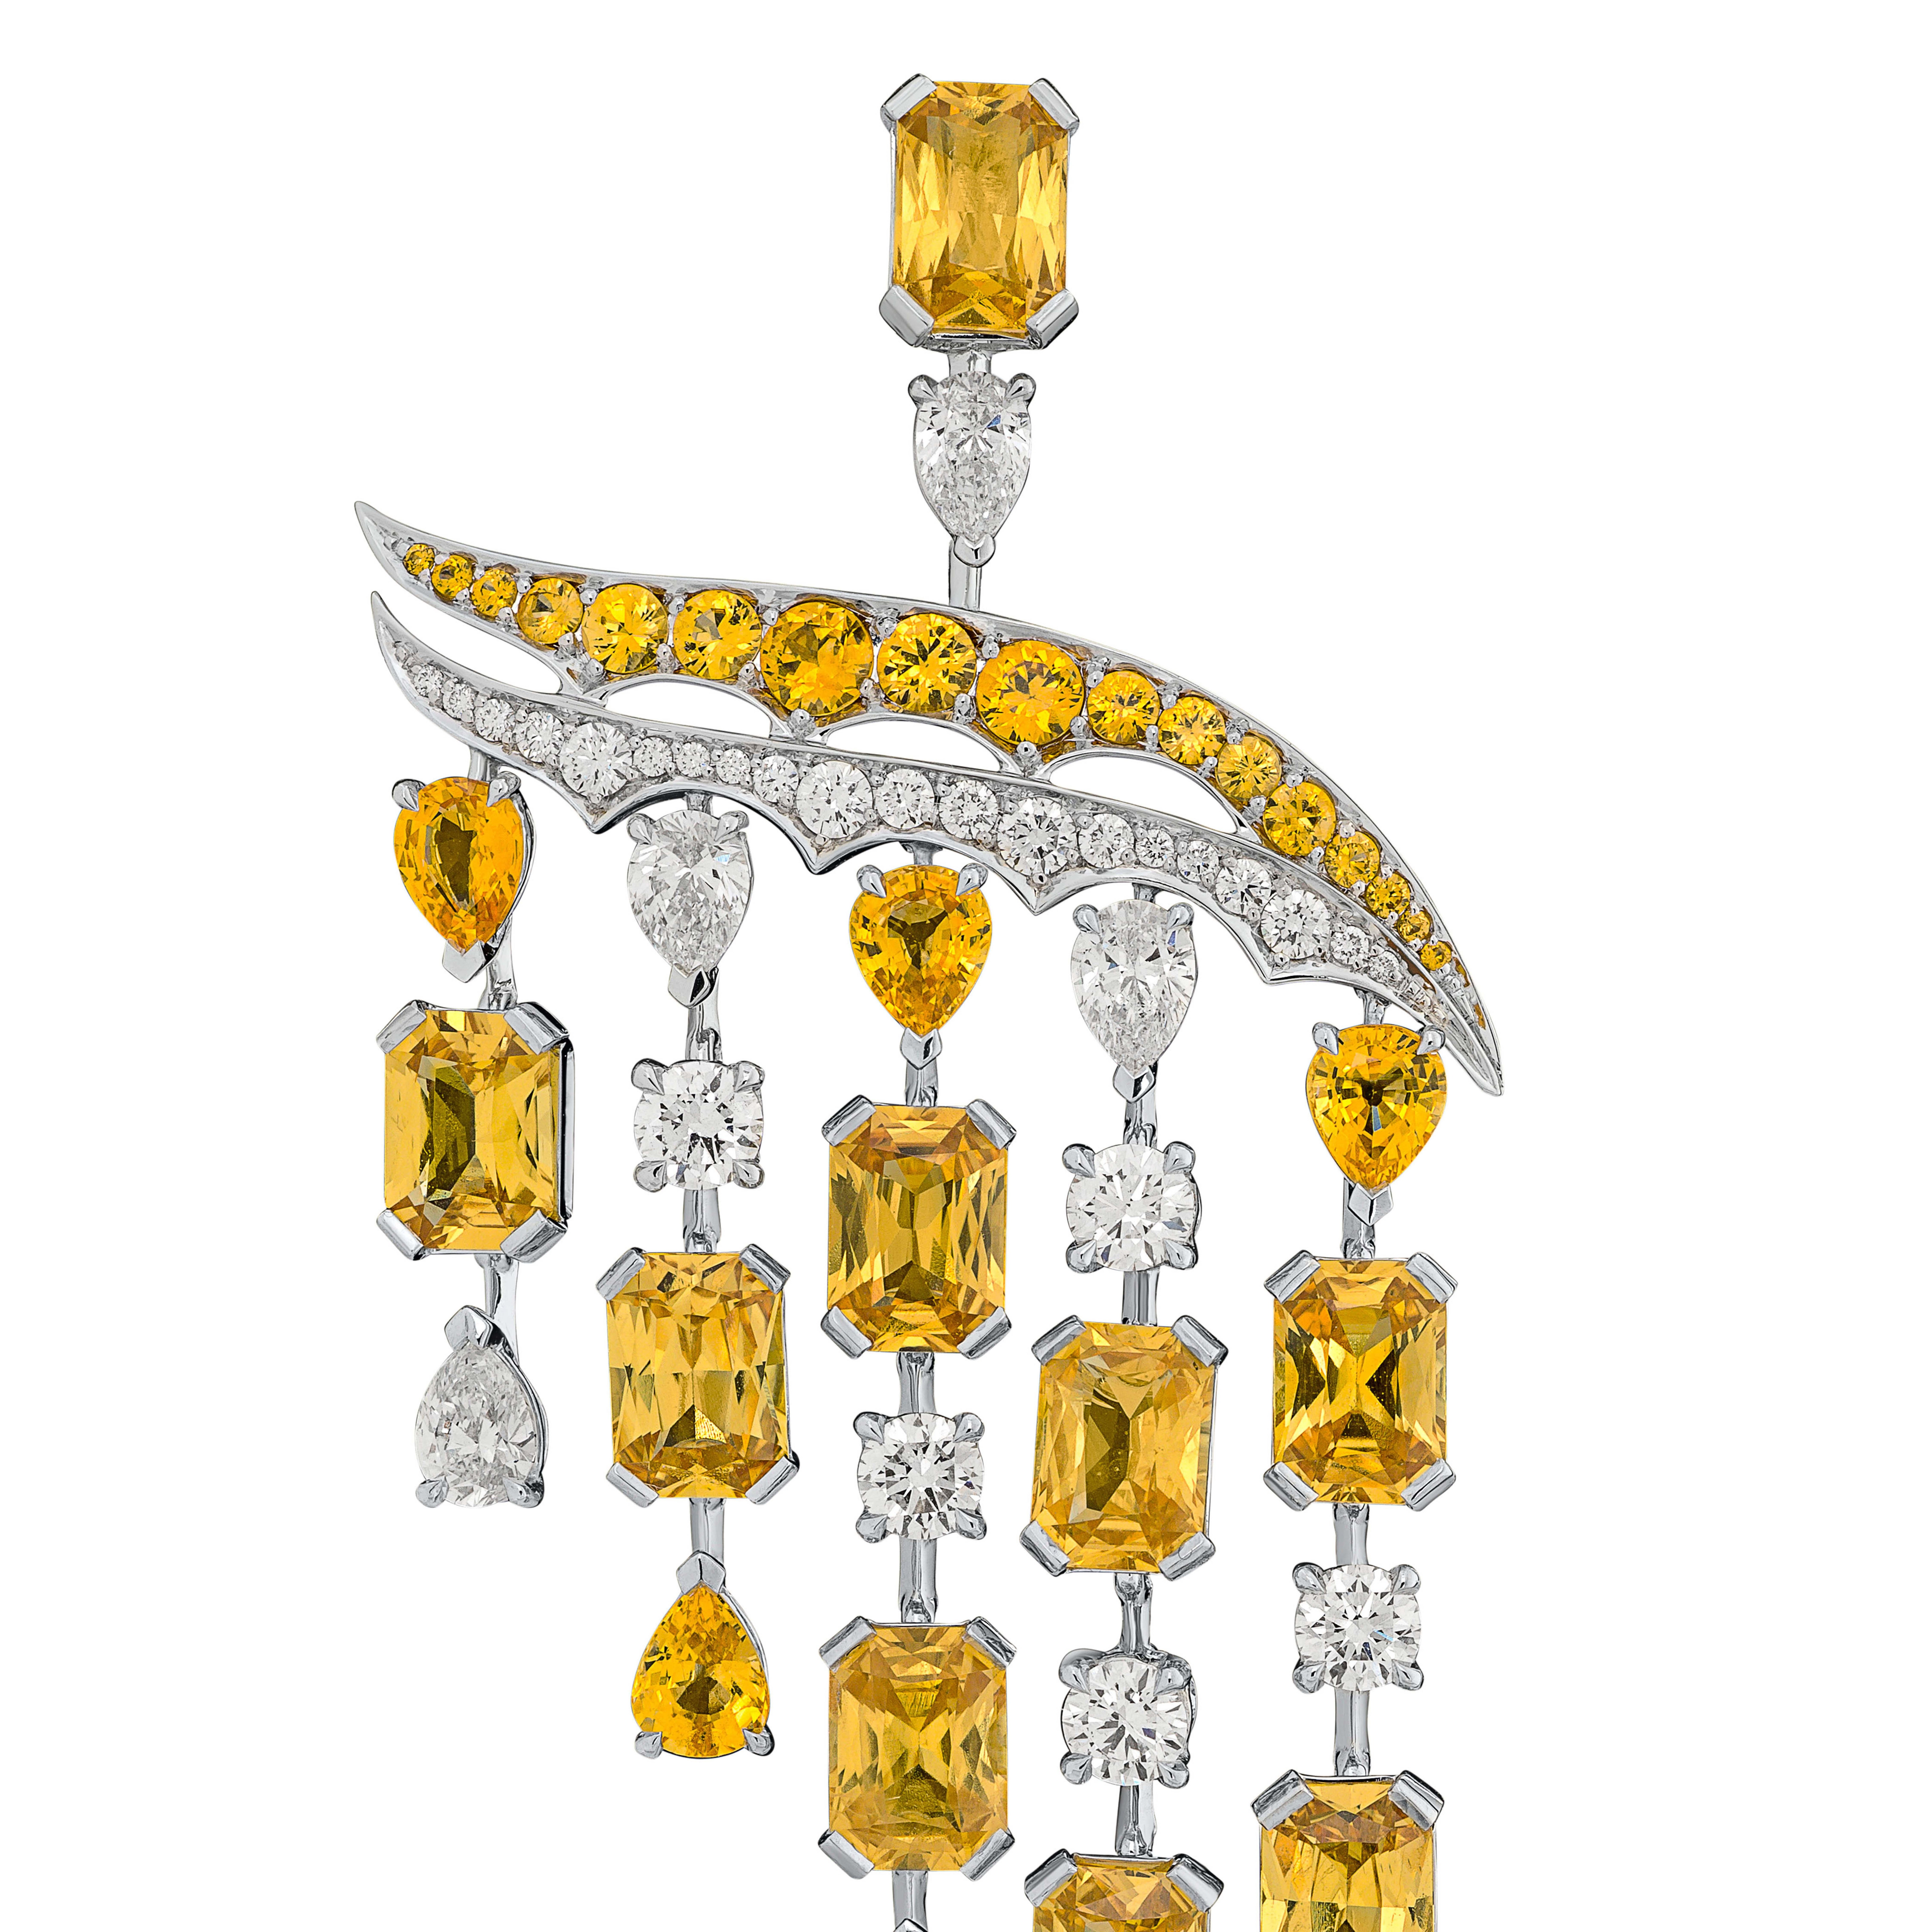 Emerald Cut 18 Karat White Gold, White Diamonds and Yellow Sapphire Chandelier Earrings For Sale